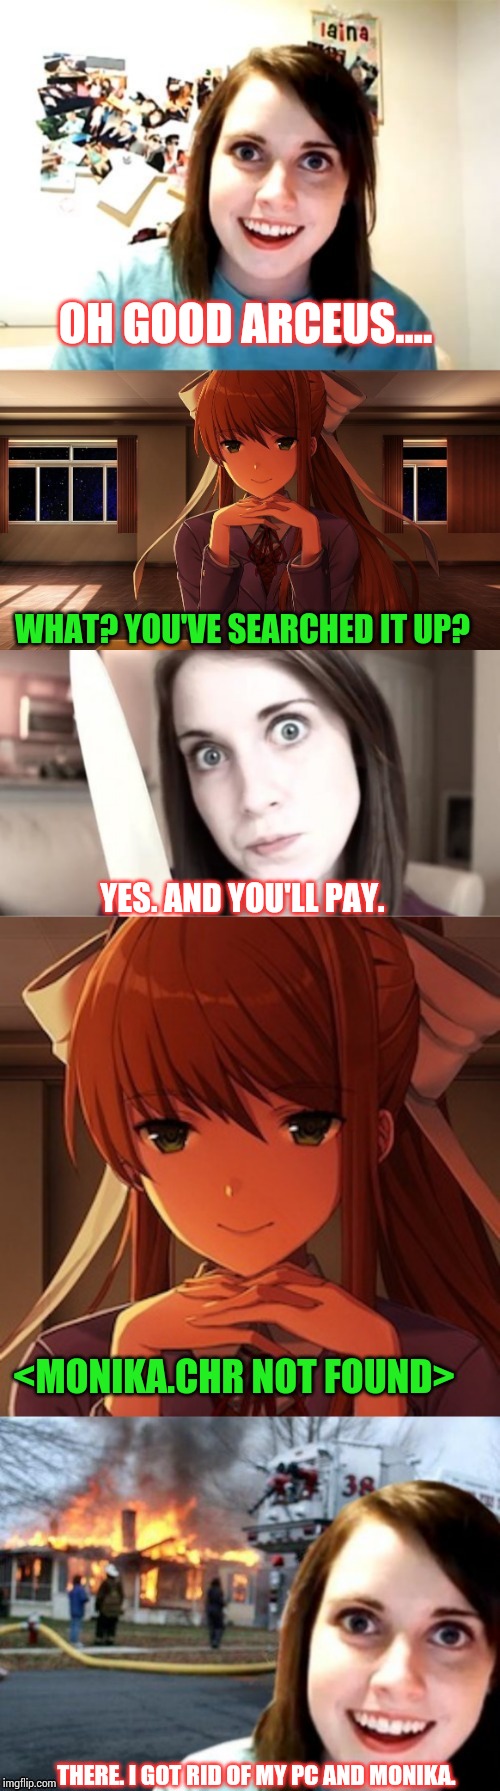 OH GOOD ARCEUS.... WHAT? YOU'VE SEARCHED IT UP? YES. AND YOU'LL PAY. THERE. I GOT RID OF MY PC AND MONIKA. <MONIKA.CHR NOT FOUND> | image tagged in oag vs monika | made w/ Imgflip meme maker